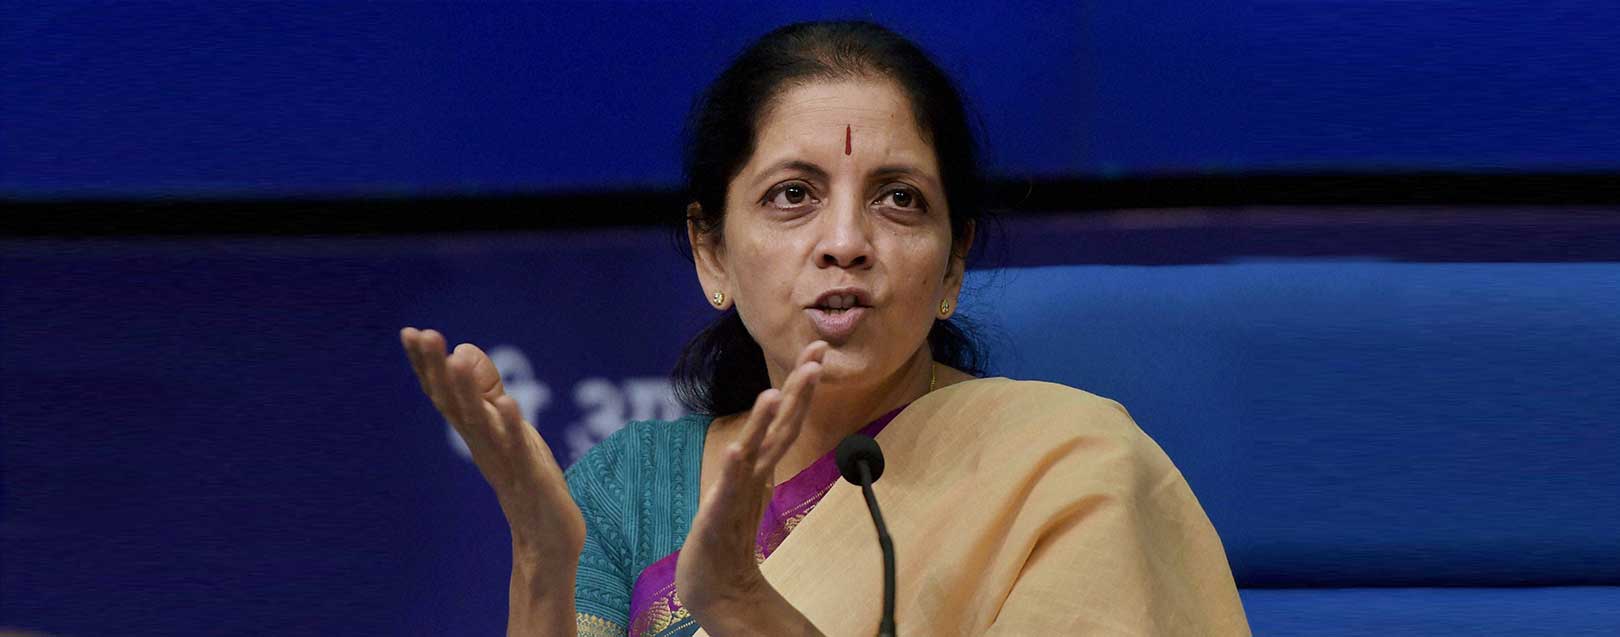 Sitharaman complains of ‘sledging’ in FTA talks